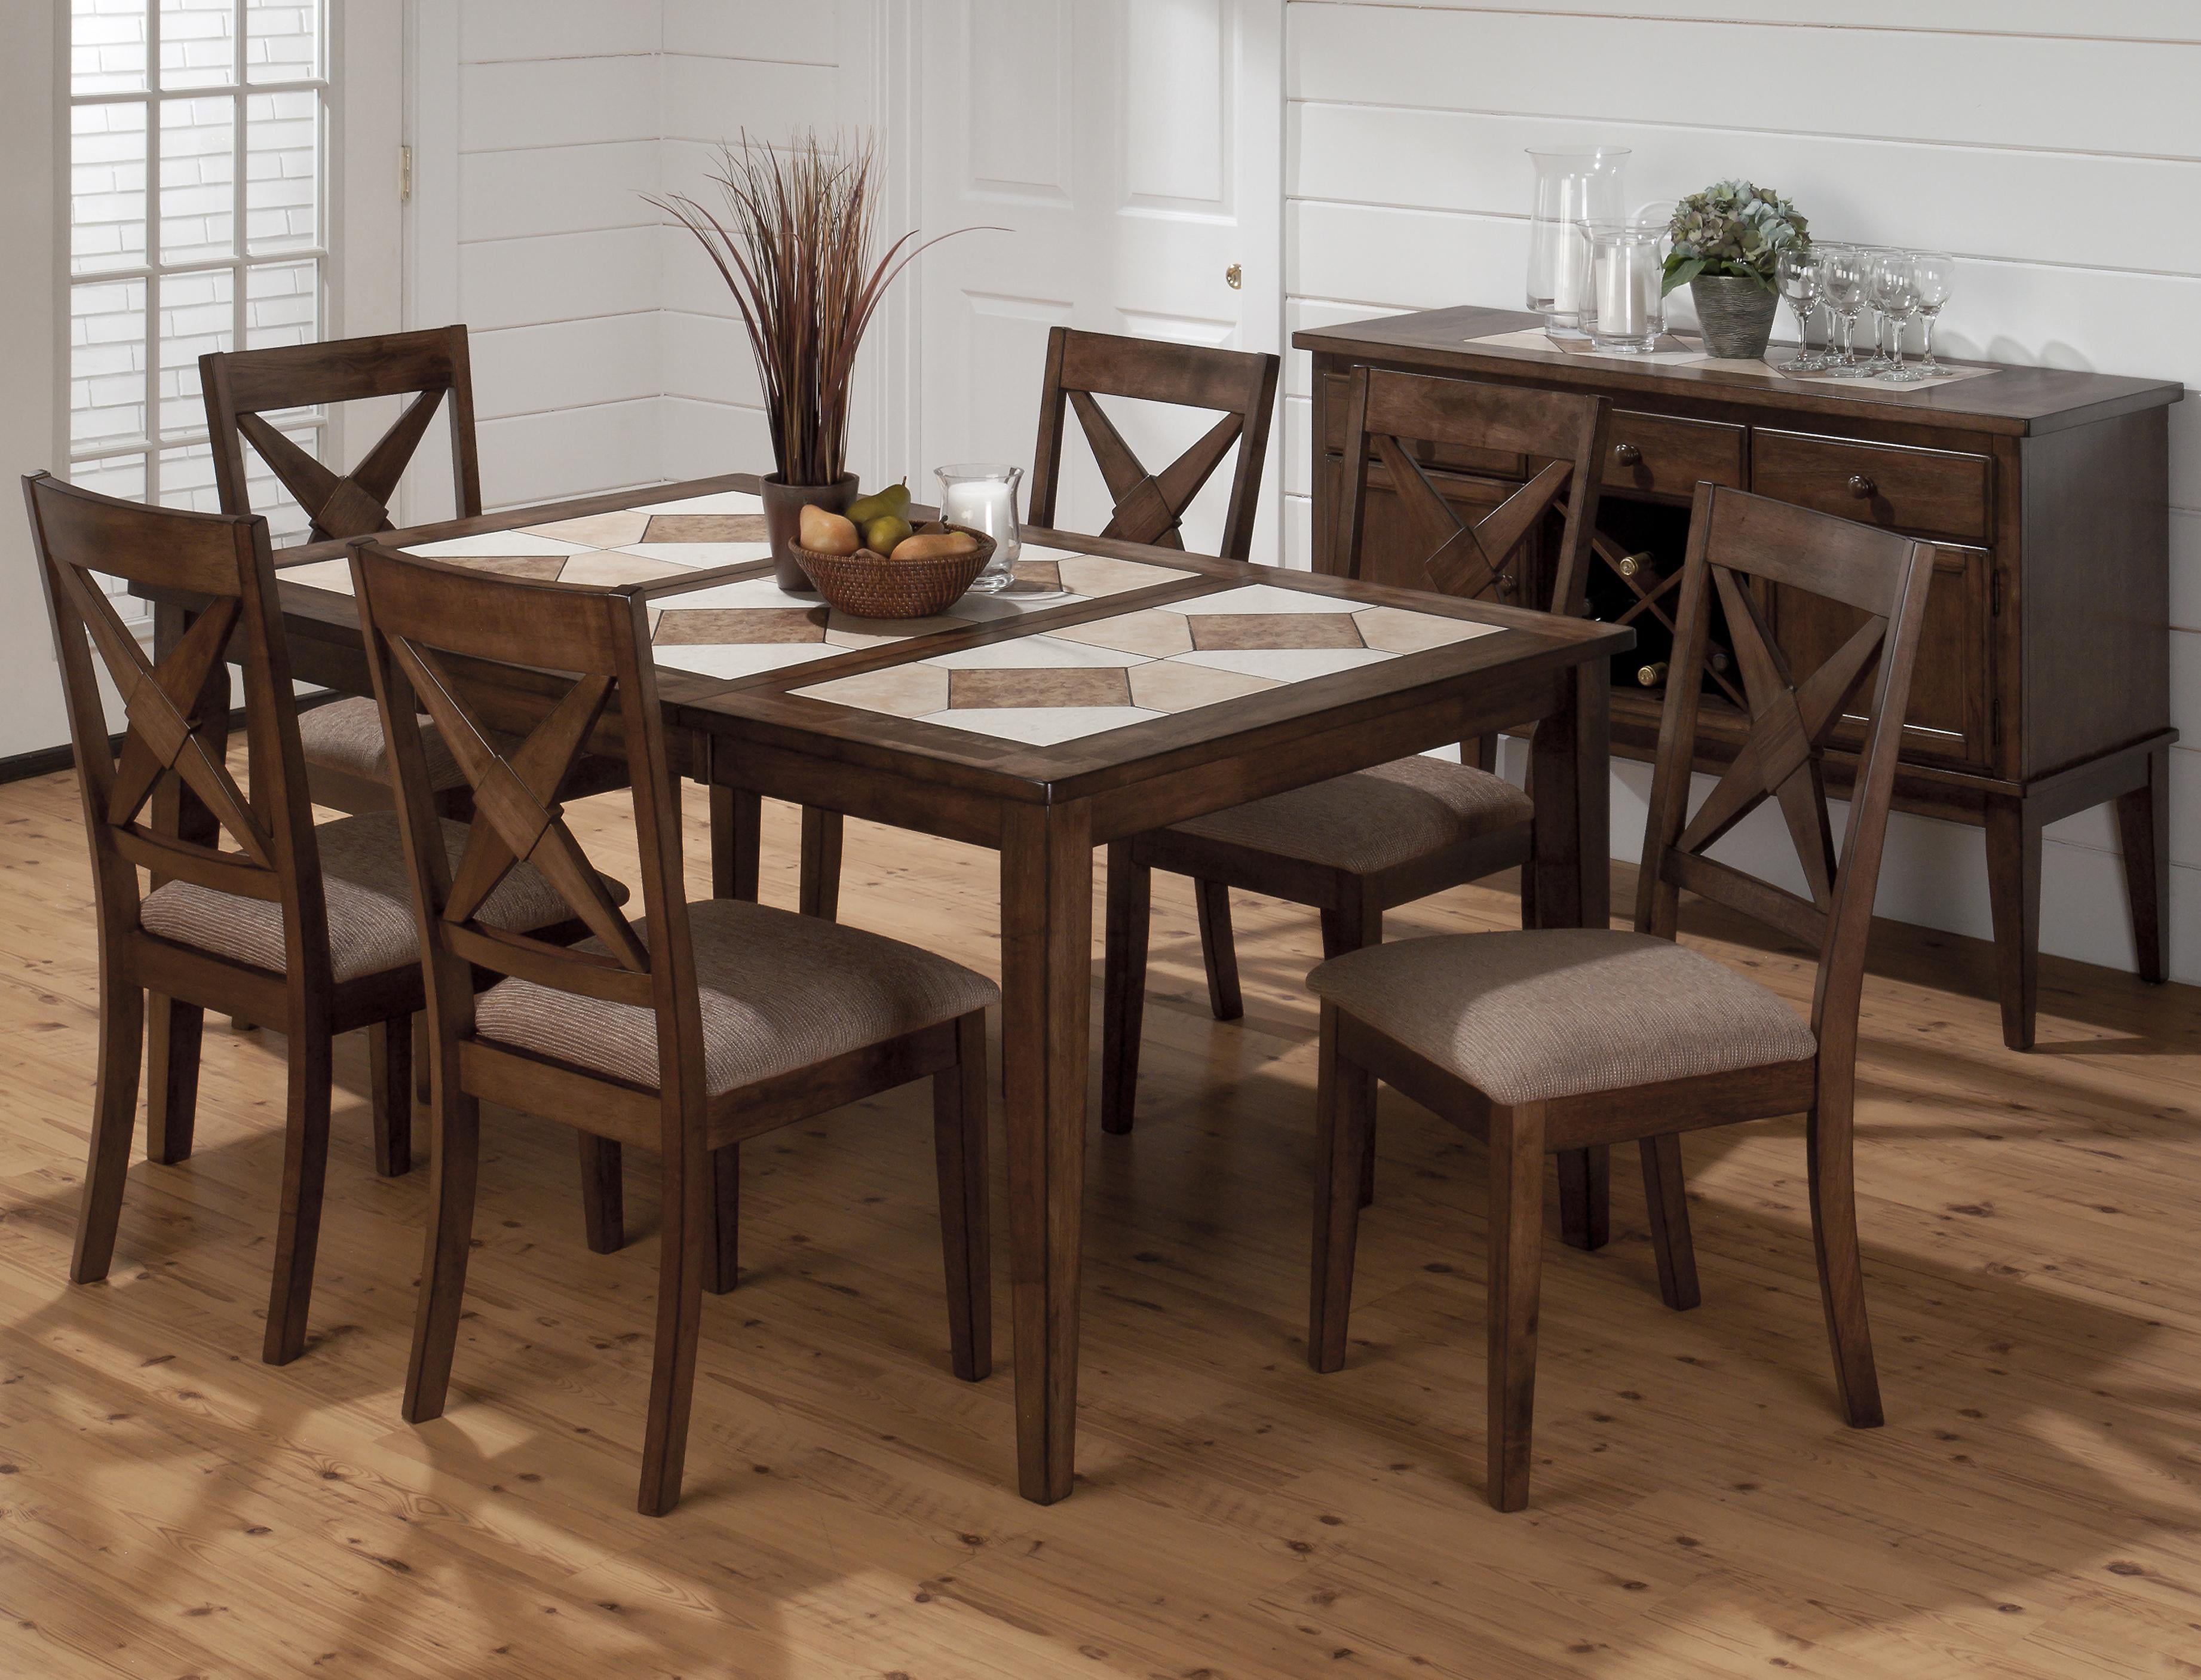 Tucson Dining Table With Ceramic Tile, Tile Kitchen Table And Chairs